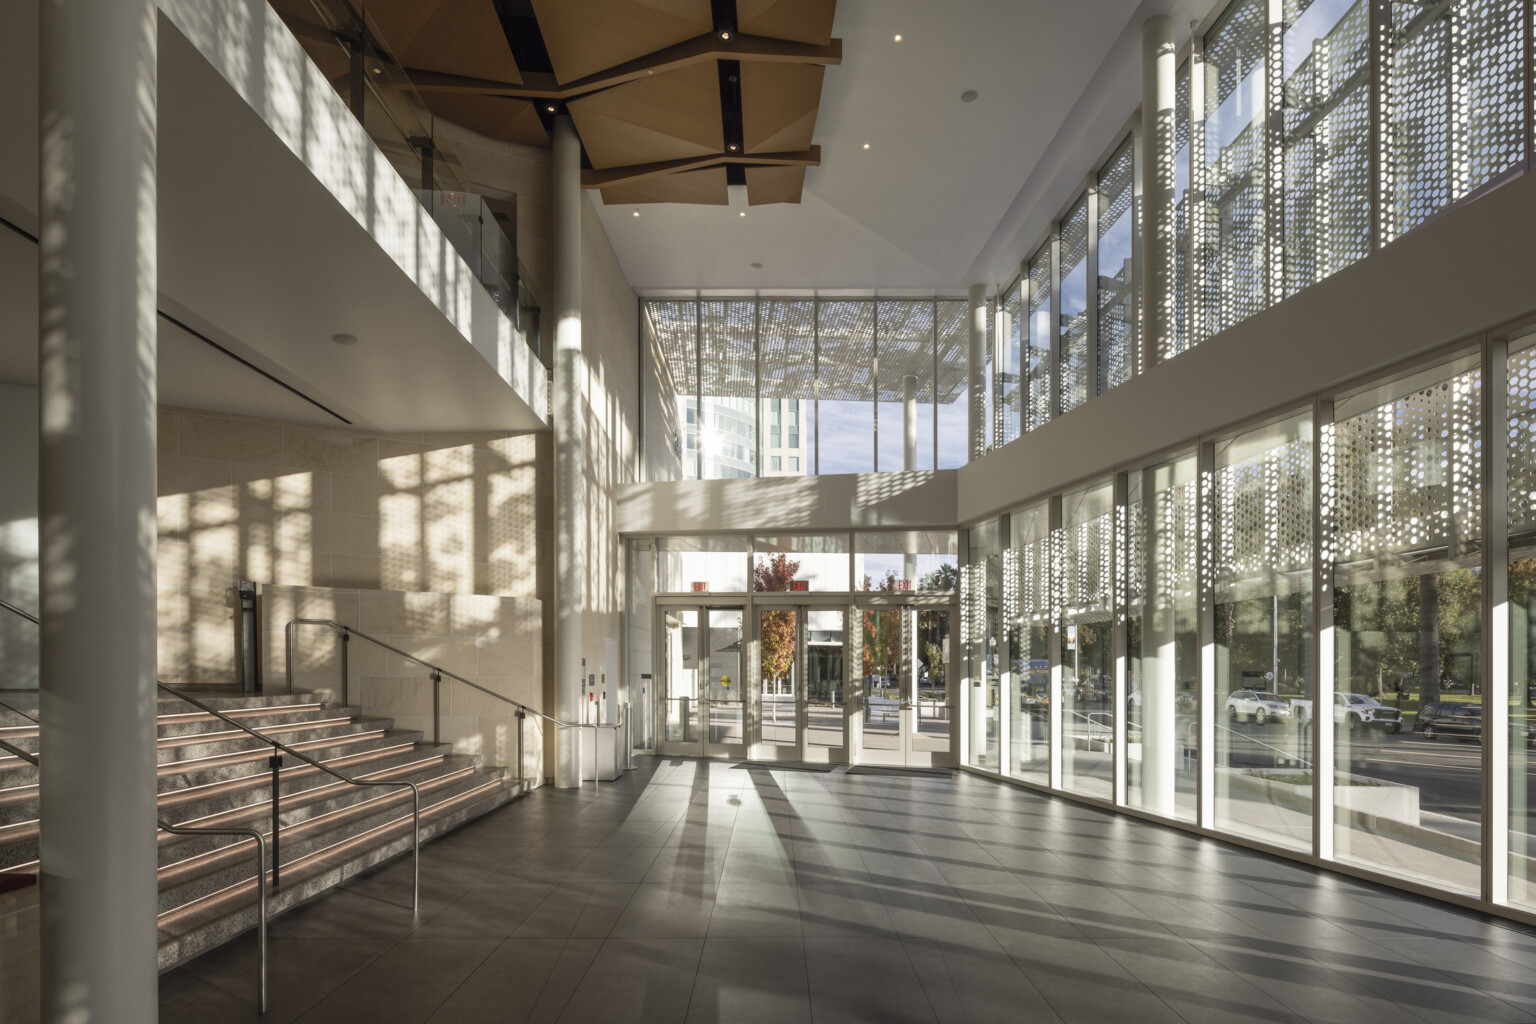 Two-story lobby space lit by floor to ceiling glass windows; wood sculpture covers ceiling; perforated light shines through the exterior lacy scrim